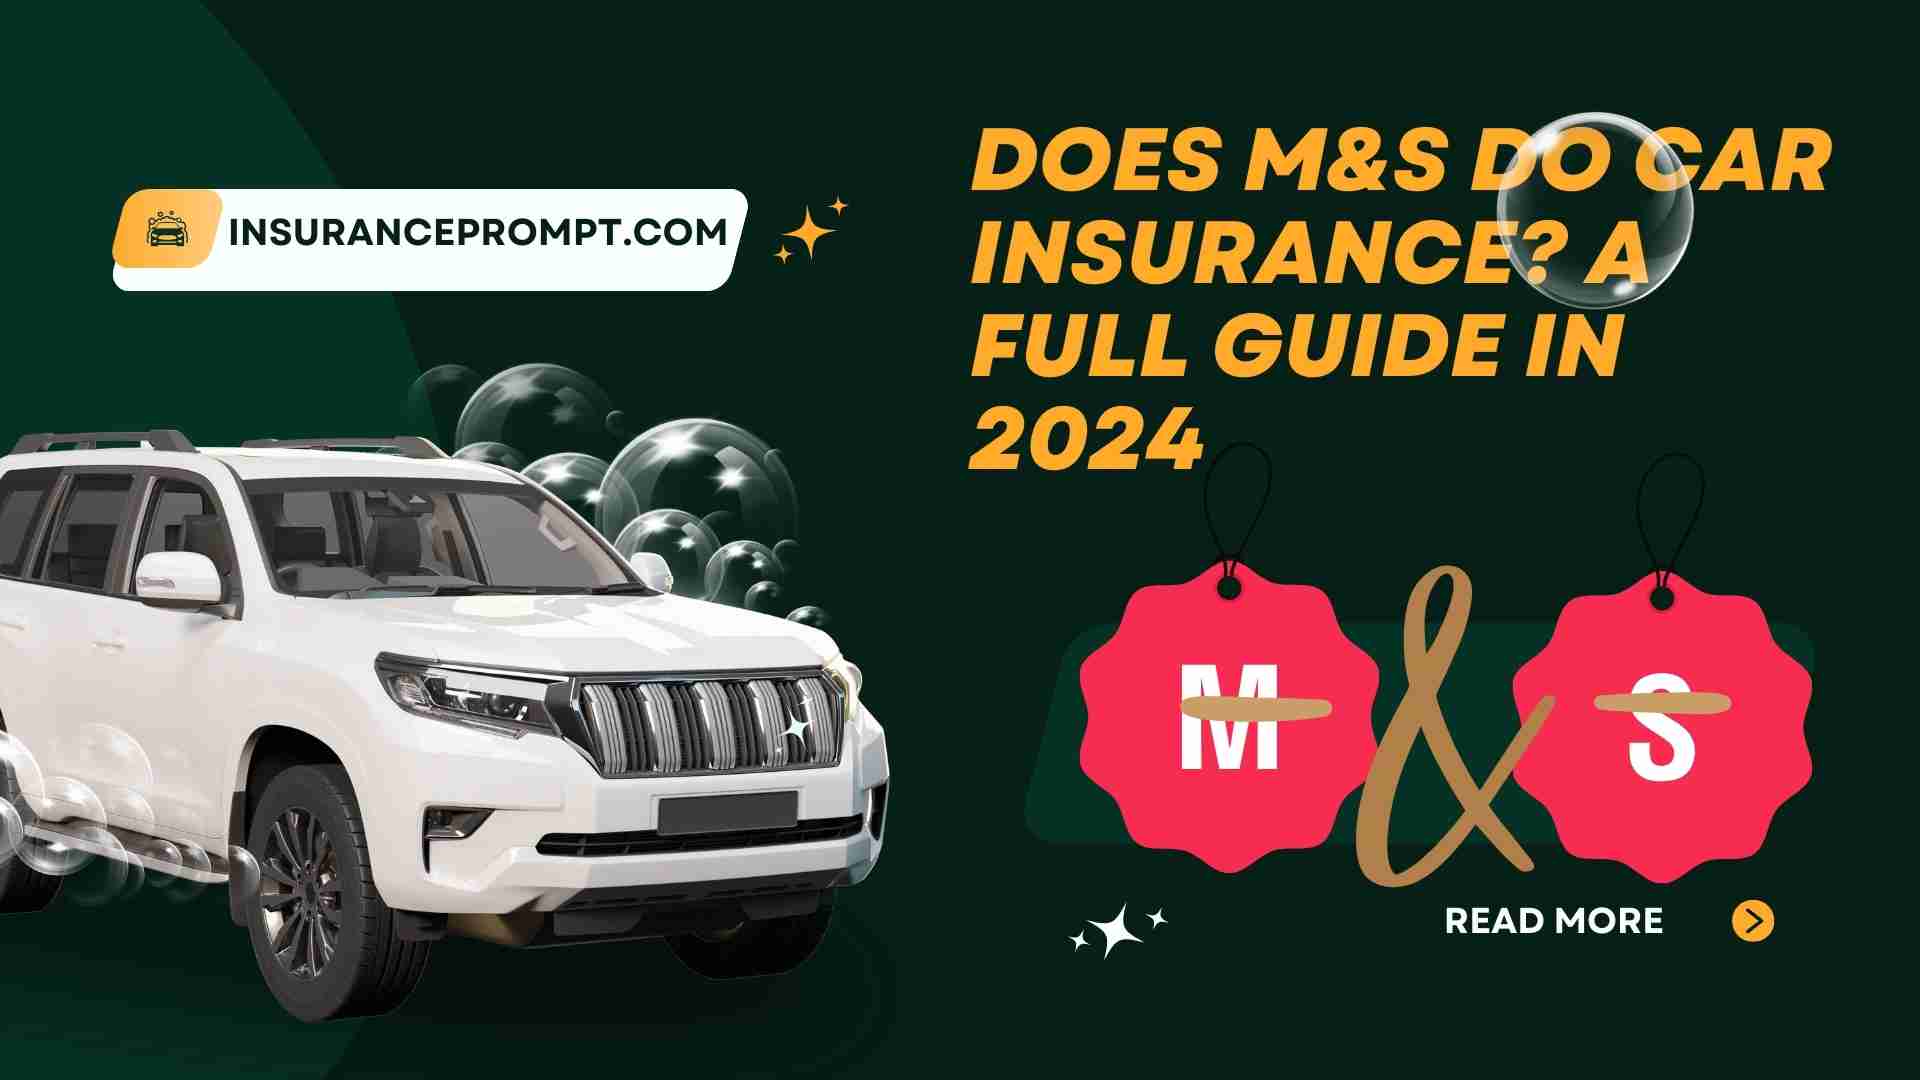 Does M&S Do Car Insurance? A Full Guide In 2024